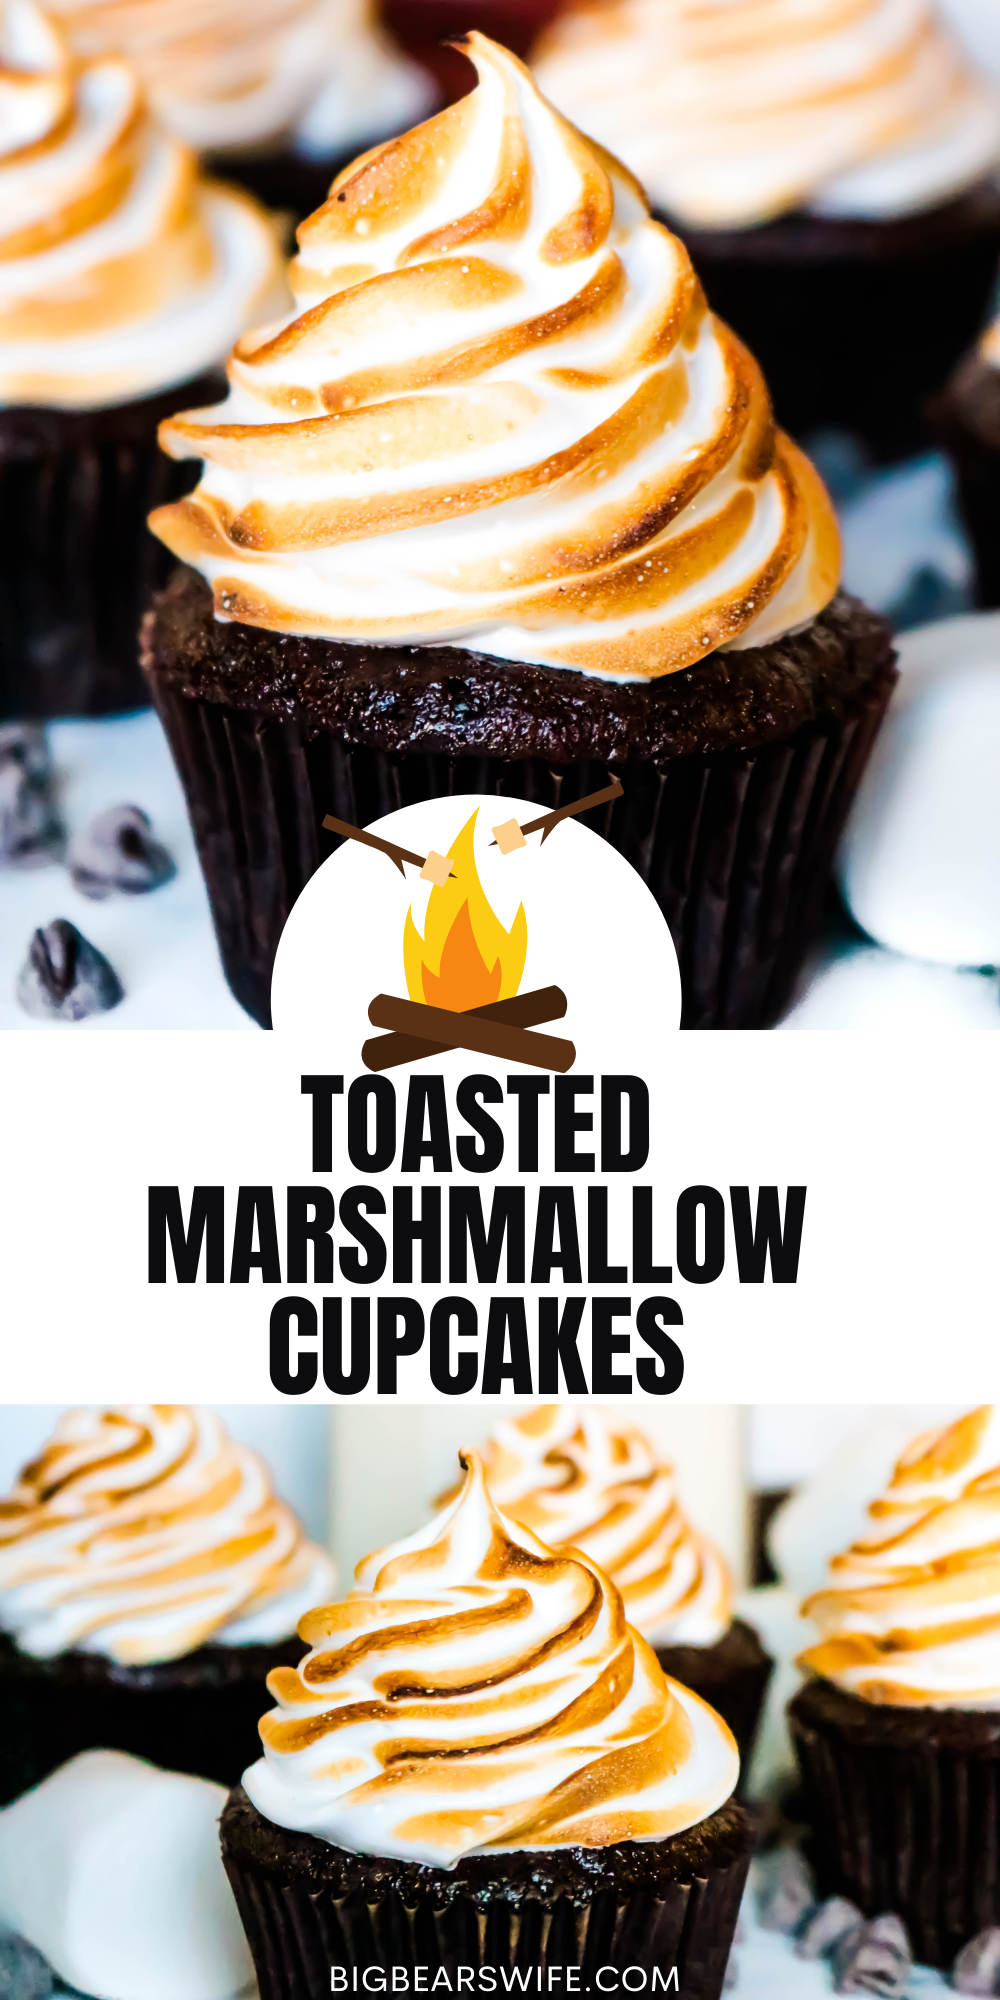 Toasted Marshmallow Cupcakes bring the taste of campfire marshmallows and homemade chocolate cupcakes together in this tasty and easy dessert recipes.  via @bigbearswife